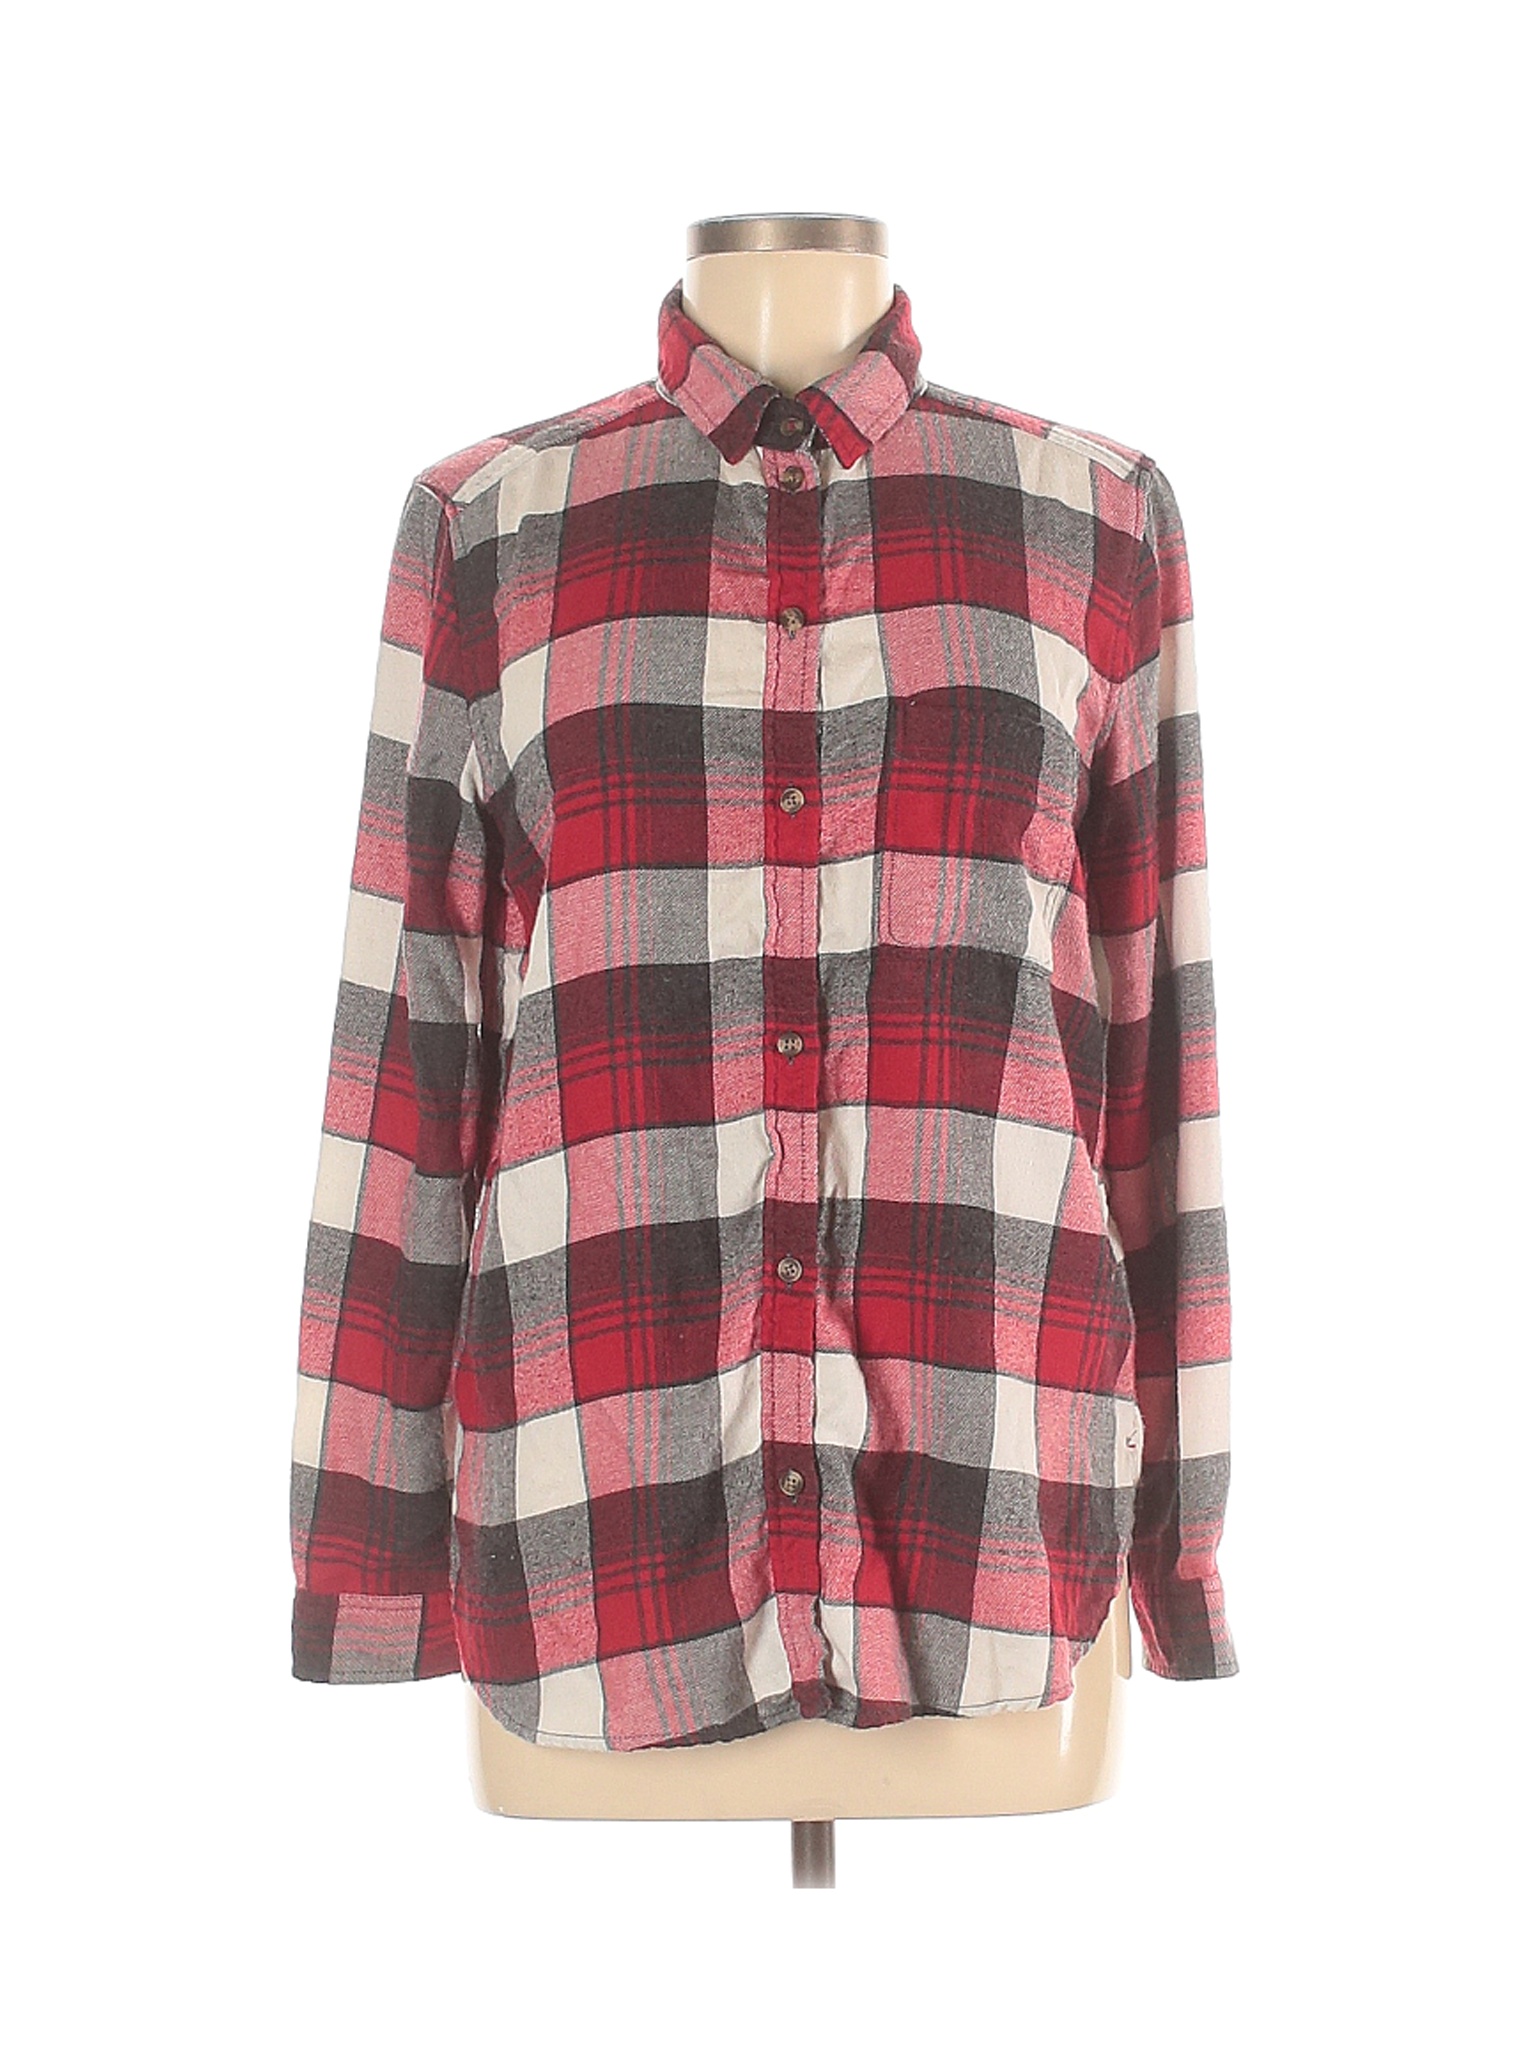 American Eagle Outfitters Women Red Long Sleeve Button-Down Shirt M | eBay